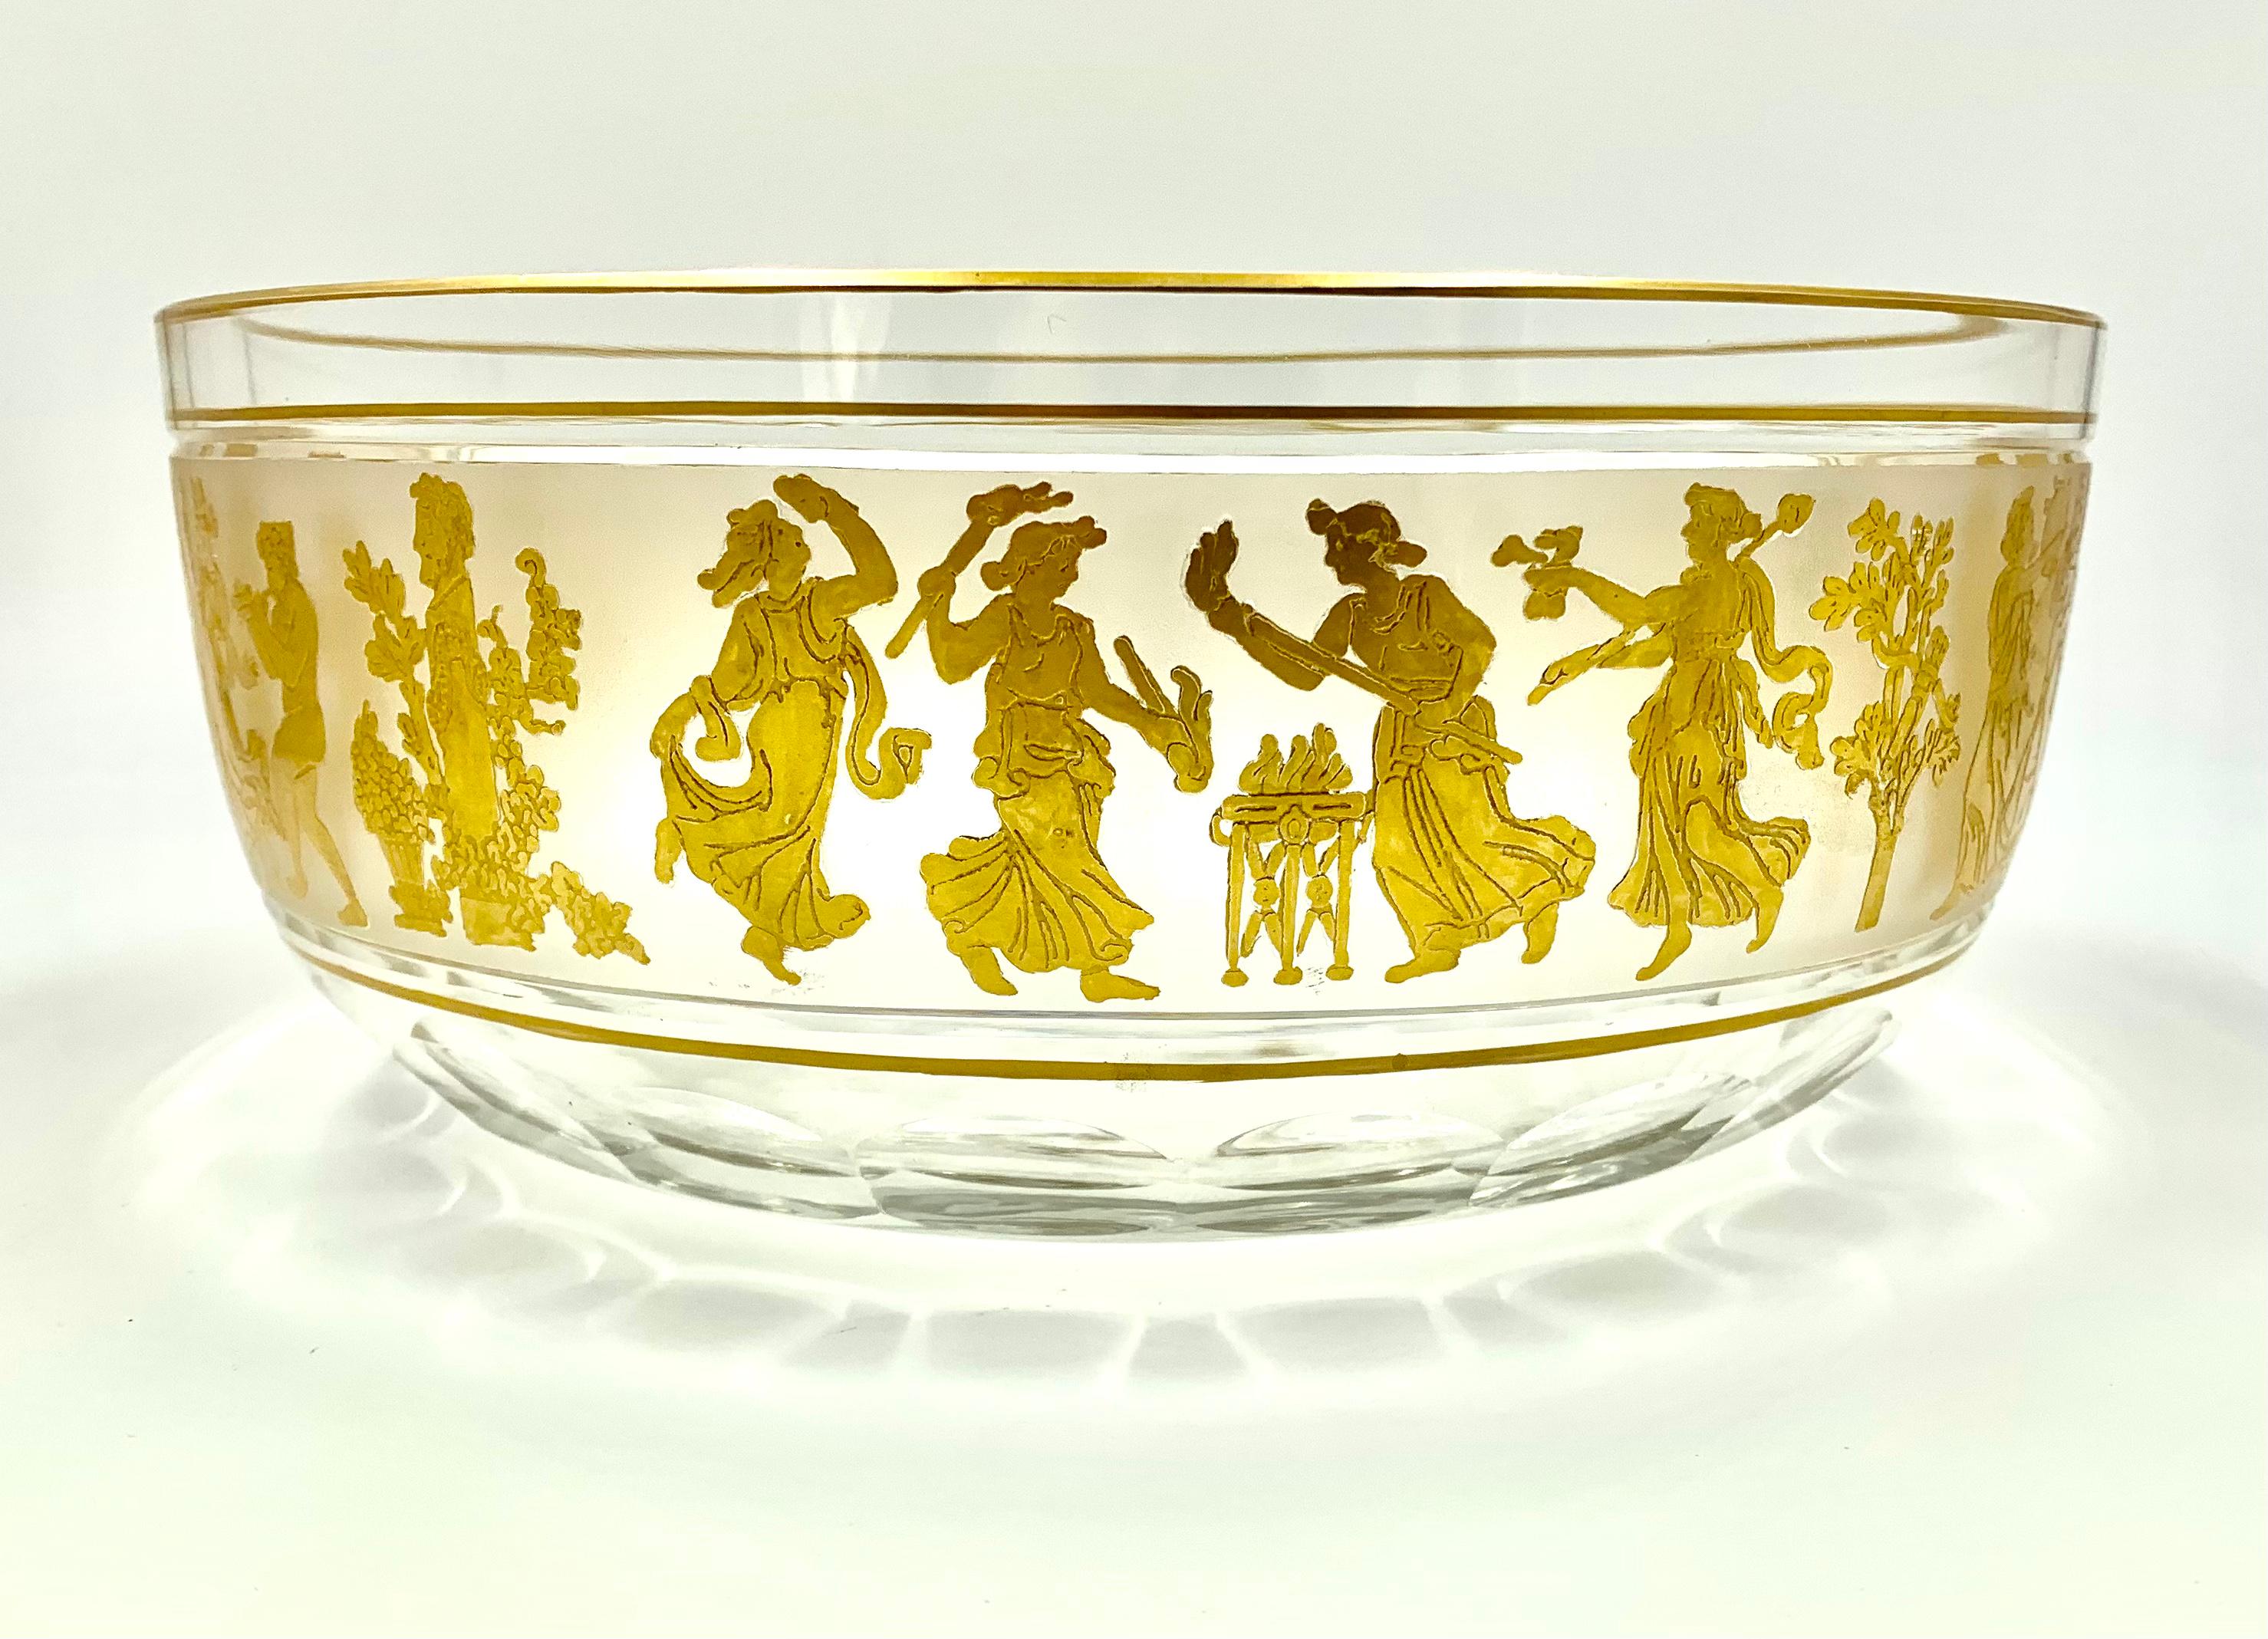 Large, beautiful estate sourced Val Saint Lambert centerpiece bowl in the famed Dans de Flore pattern. Featuring a neoclassical style Bacchanal procession of dancing Ancient Greek revelers in raised gold on a fine cut crystal background. The perfect